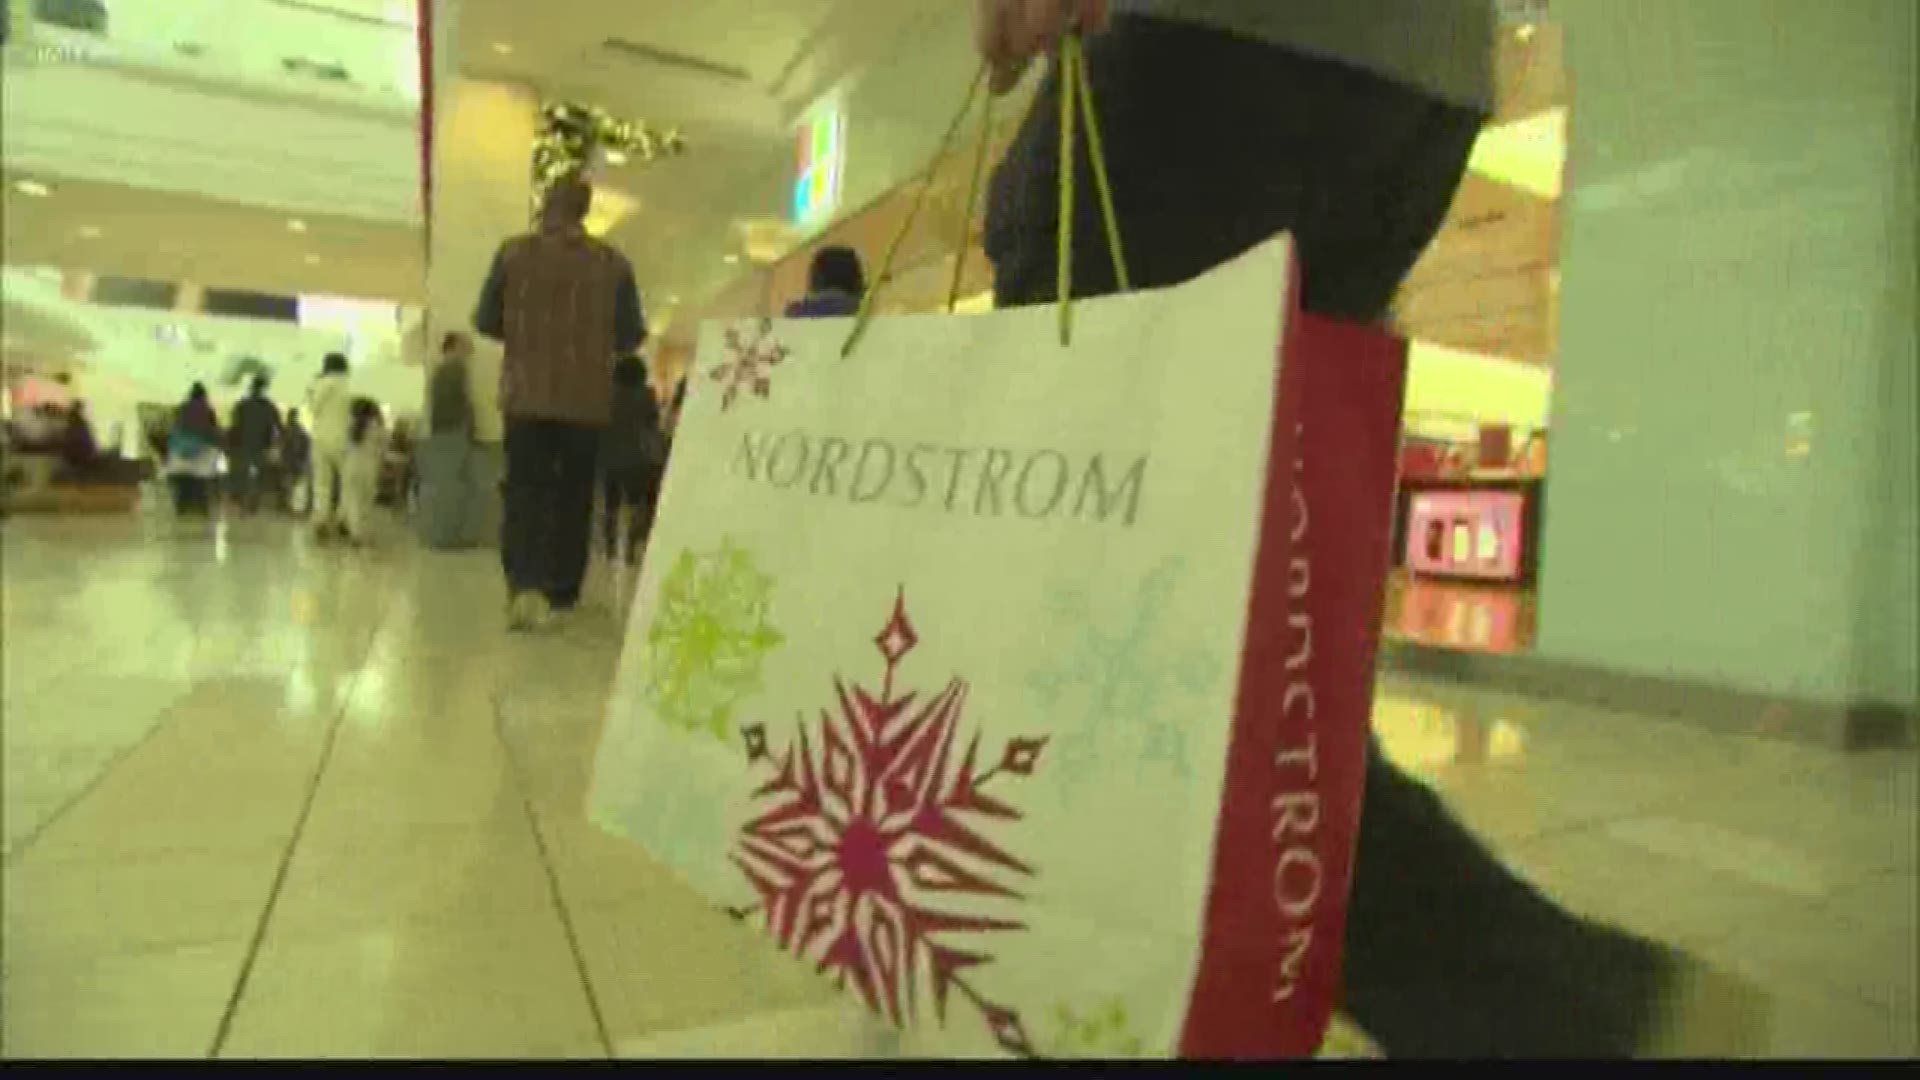 Money expert Steven M. Hughes shares tips to win this Black Friday.